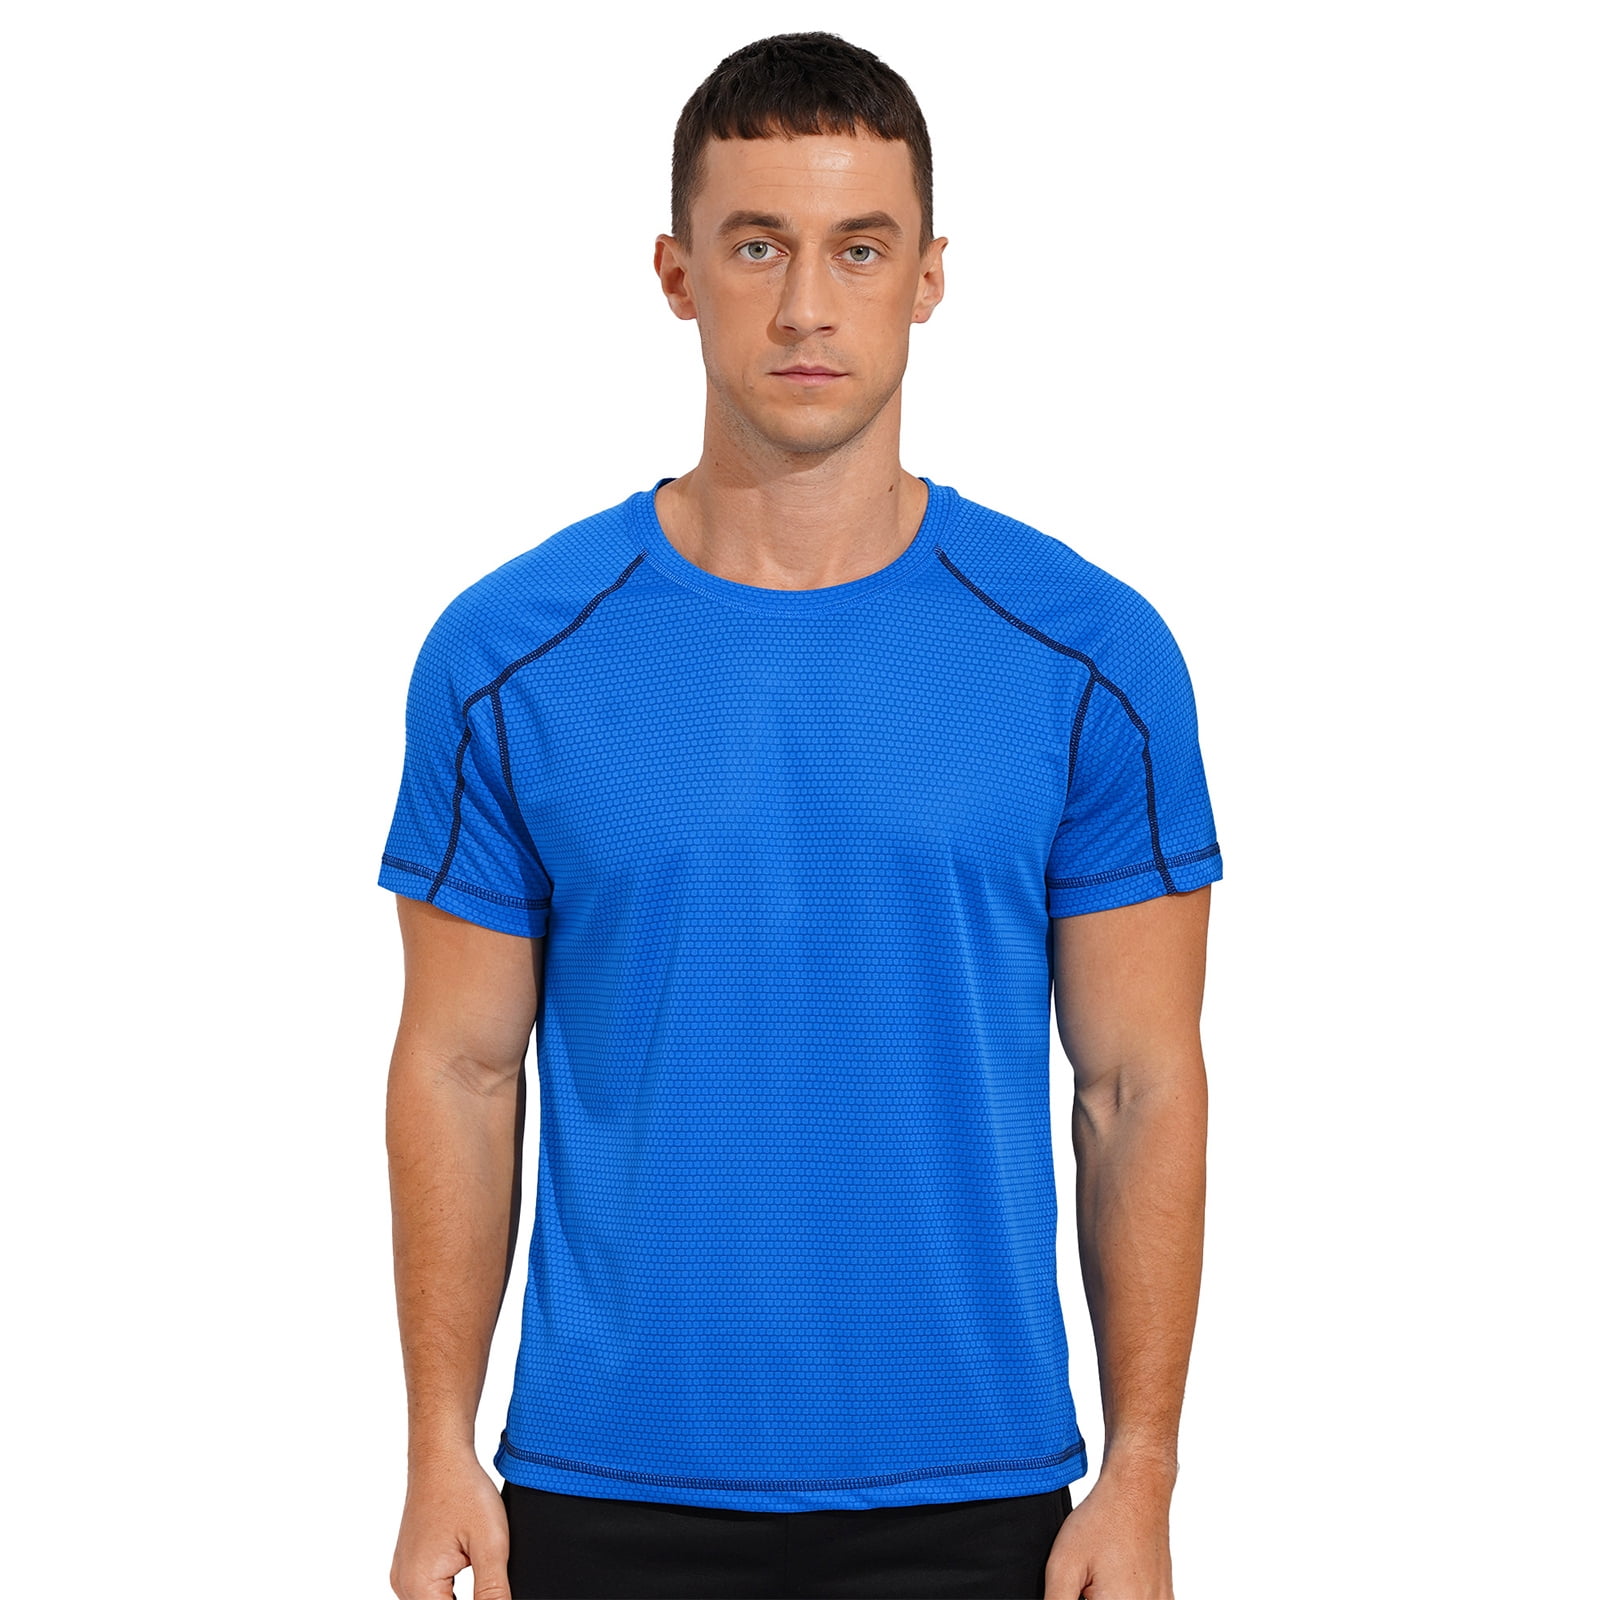 inhzoy Men's Athletic T-Shirt Quick Dry Workout Gym Sports Tee Tops Lake  Blue 7XL 